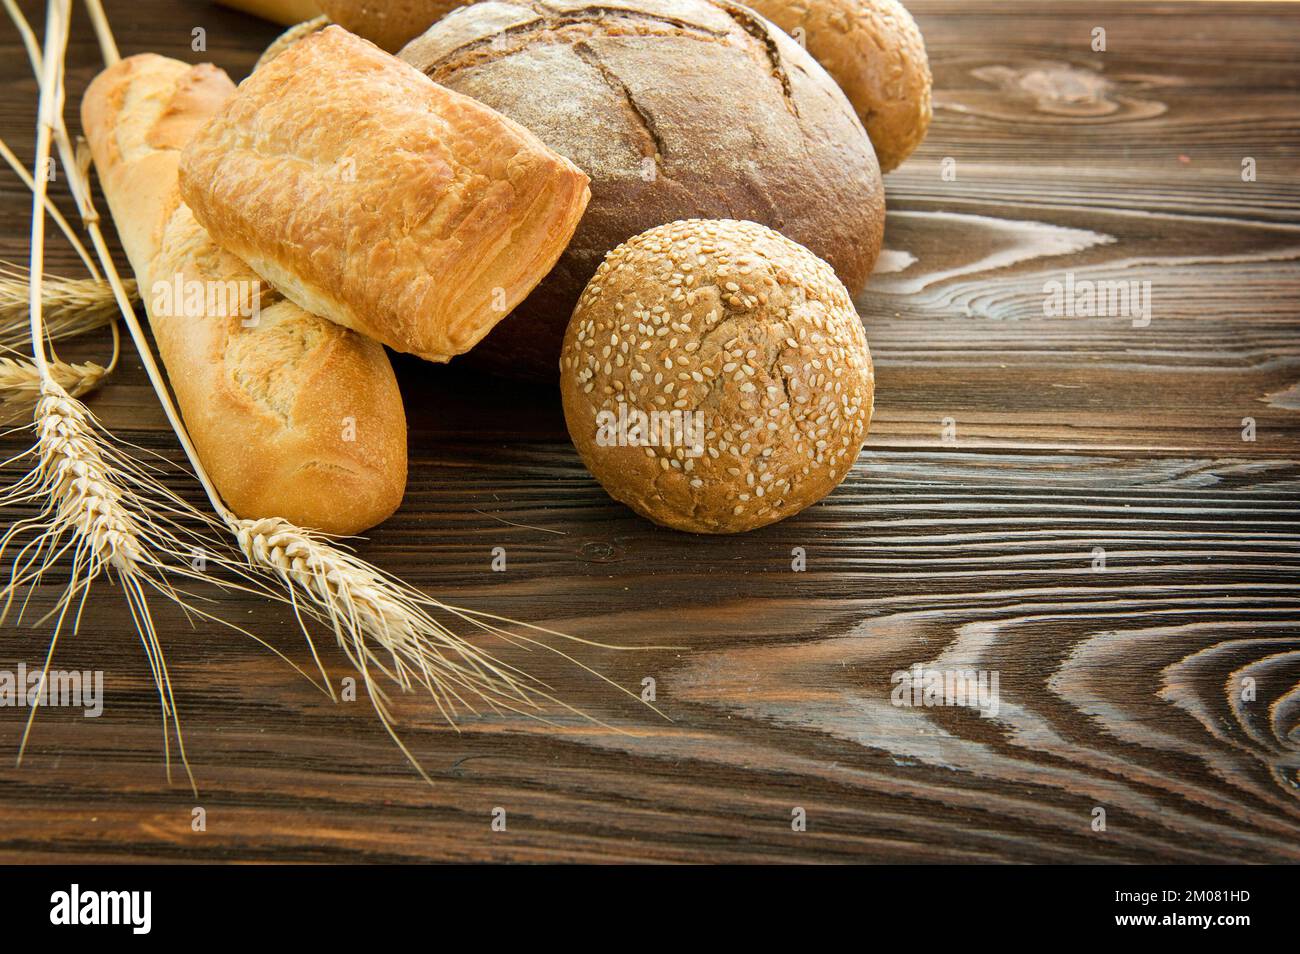 Fresh baked rustic breads on a table Stock Photo